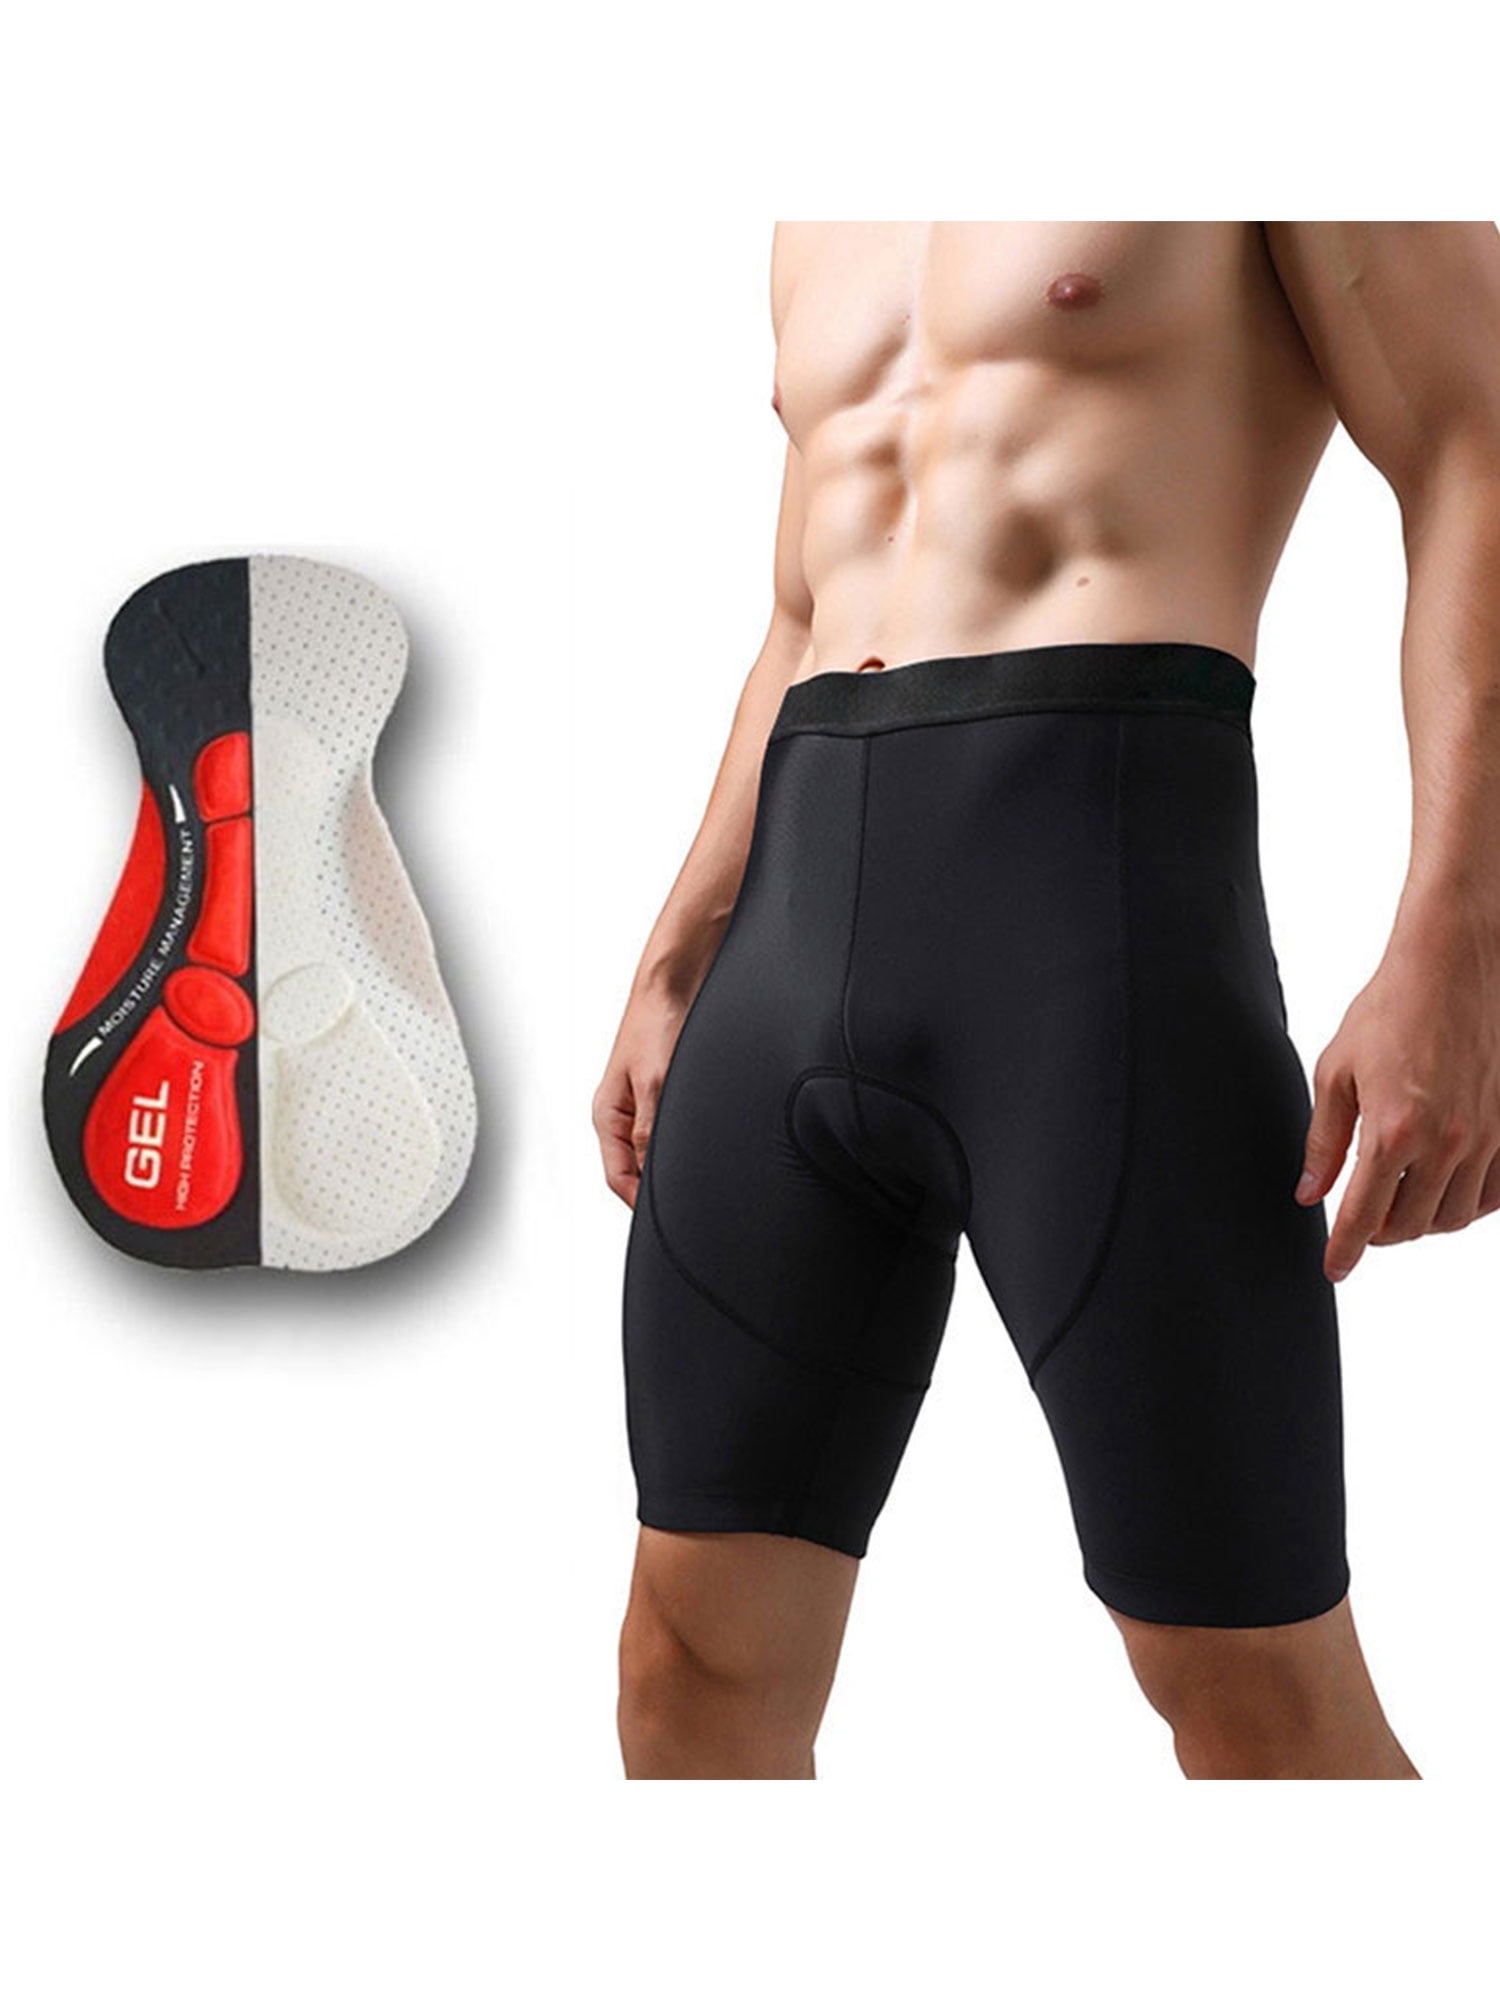 Men's Cycling Shorts Quick dry 3D Gel Padded Cushion  Bike Bicycle Underwear 